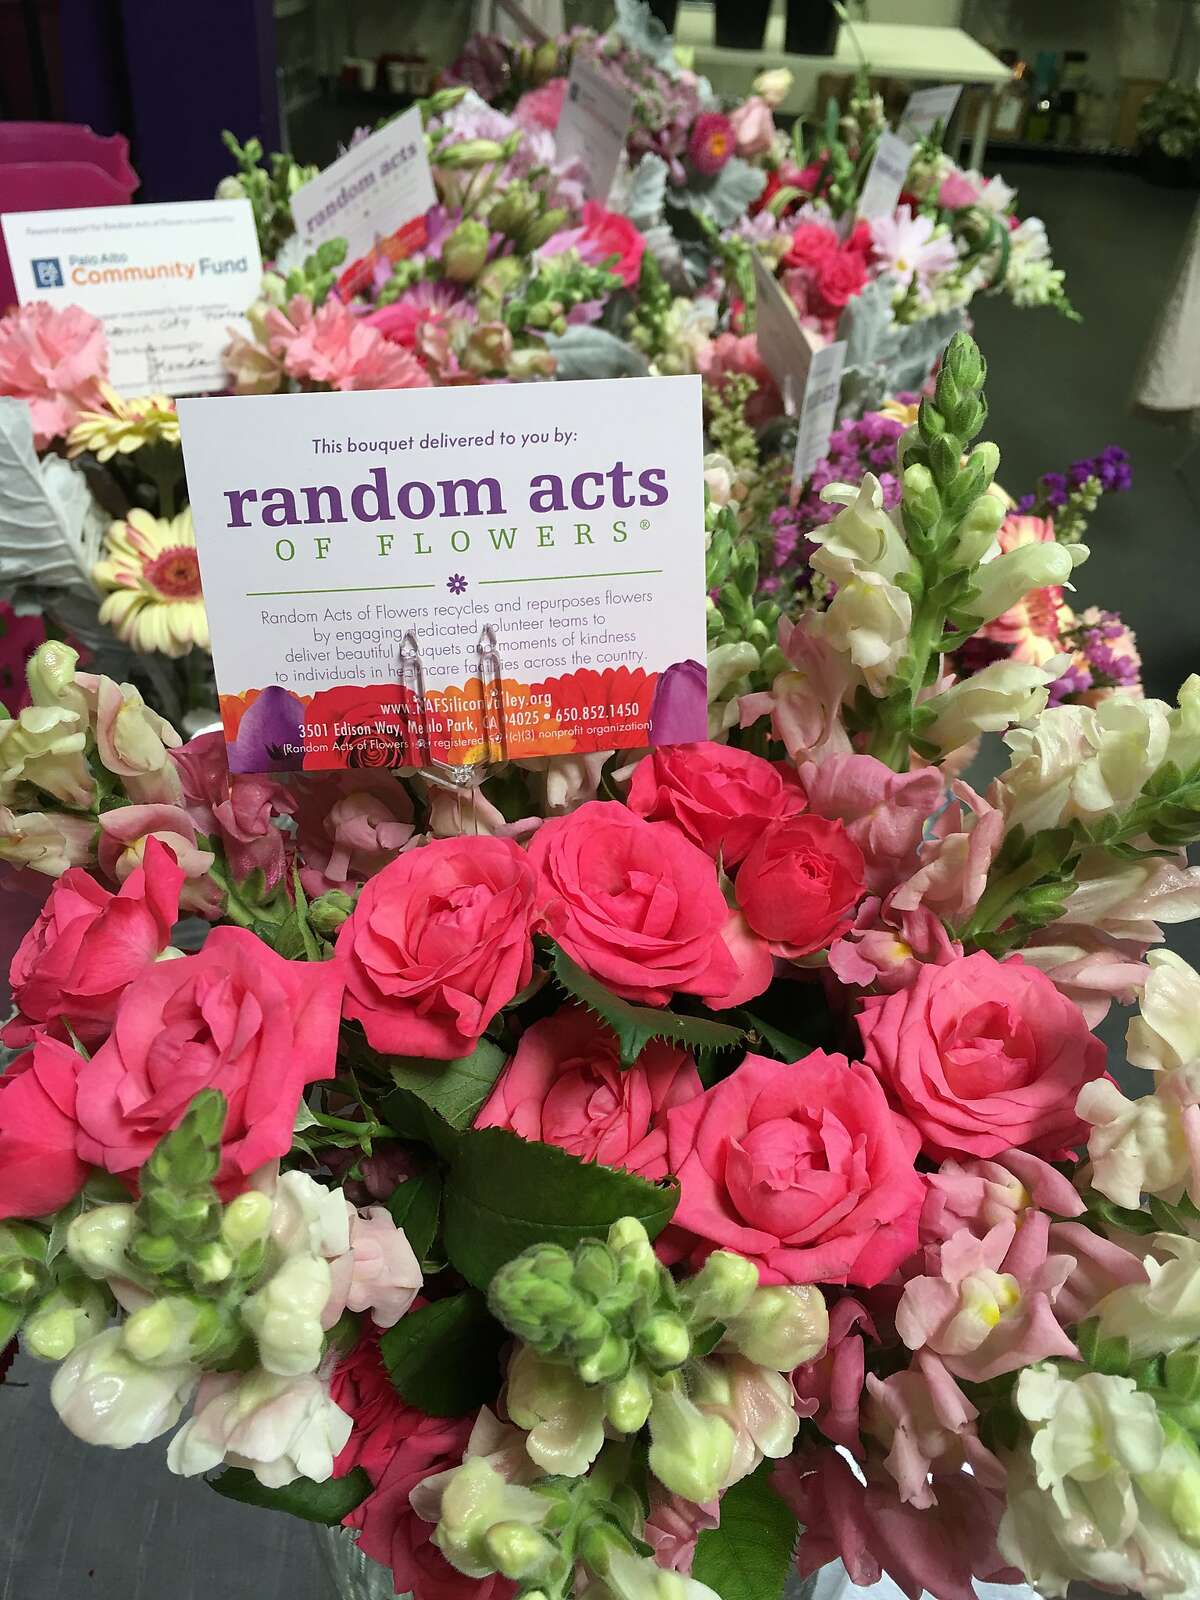 Flowers from Random Acts of Flowers in Menlo Park. Credit: Random Acts of Flowers